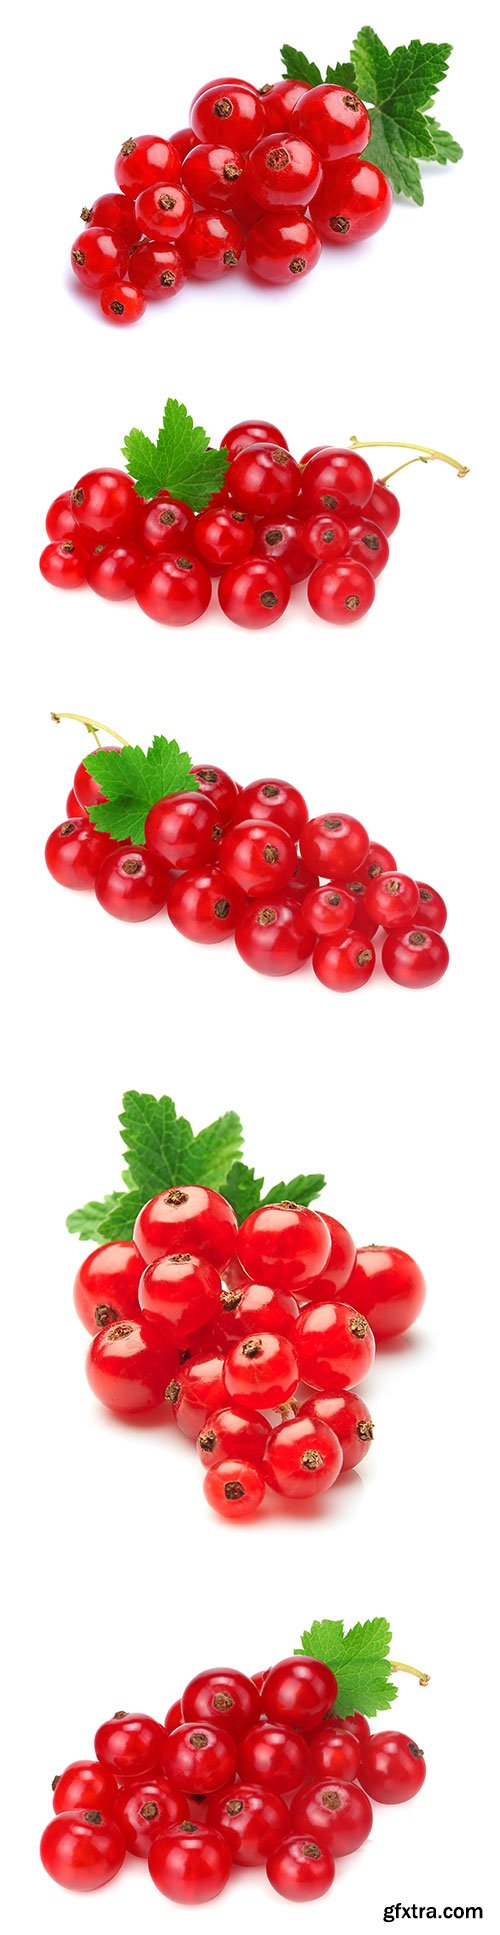 Photo - Red Currant Isolated - 5xJPGs